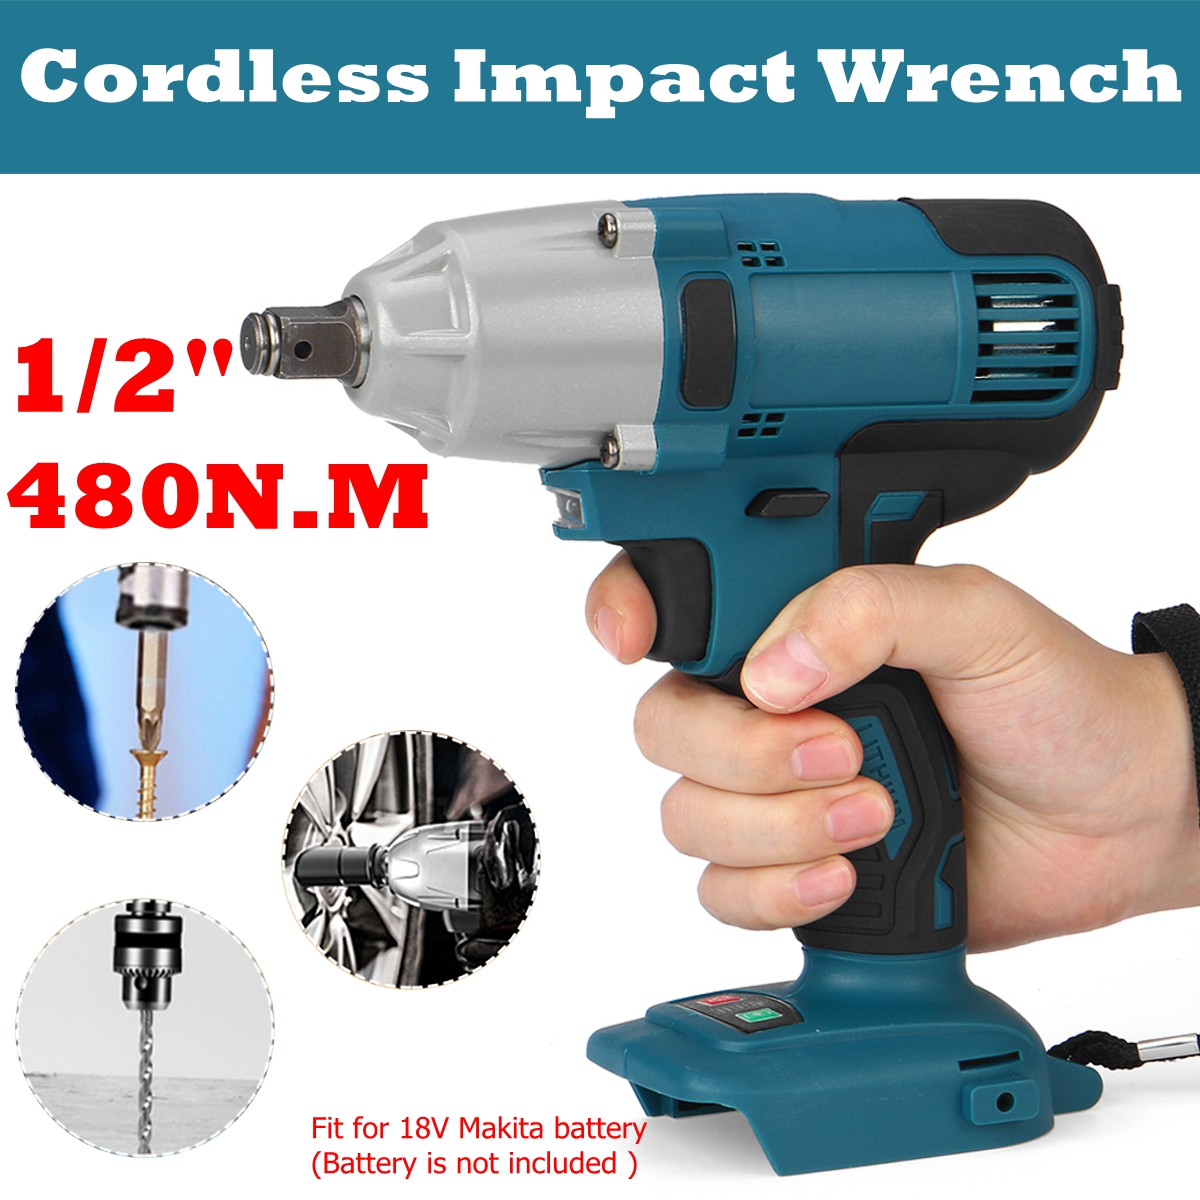 18V-480Nm-Li-Ion-Cordless-Impact-Wrench-Driver-12-Brushed-Electric-Wrench-Replacement-for-Makita-Bat-1658554-3